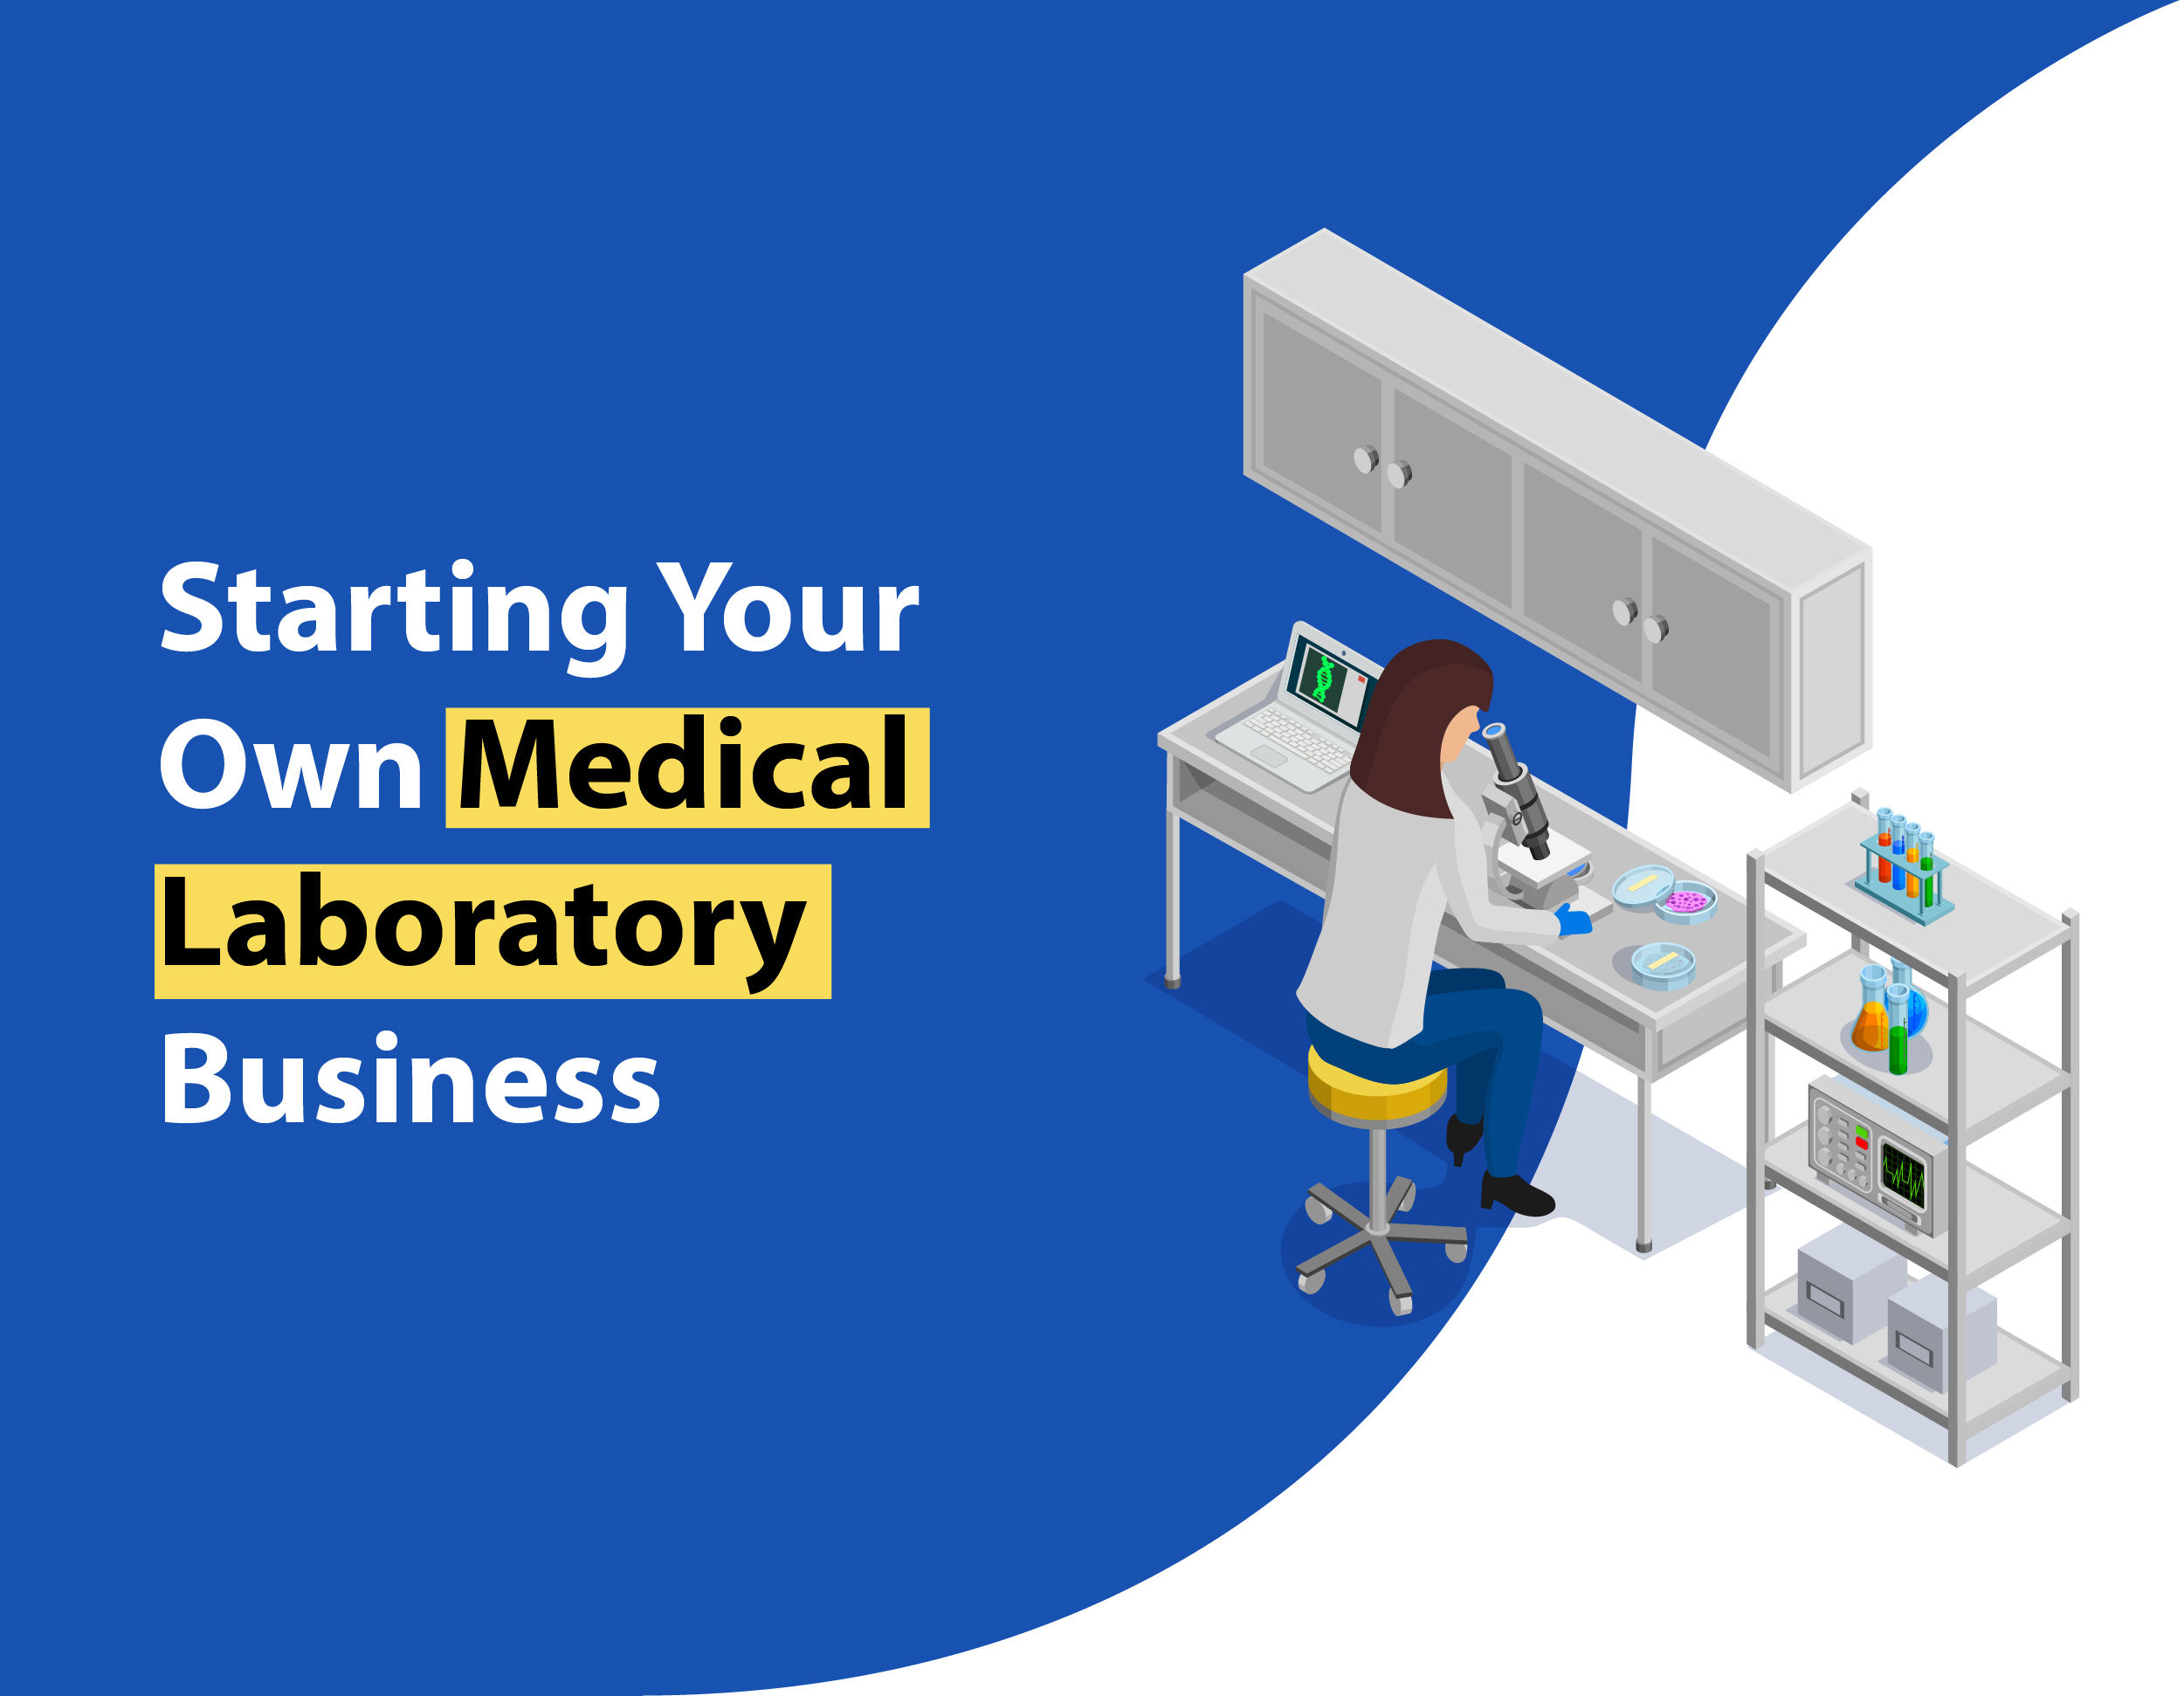 Starting Your Own Medical Laboratory Business A Step by Step Guide